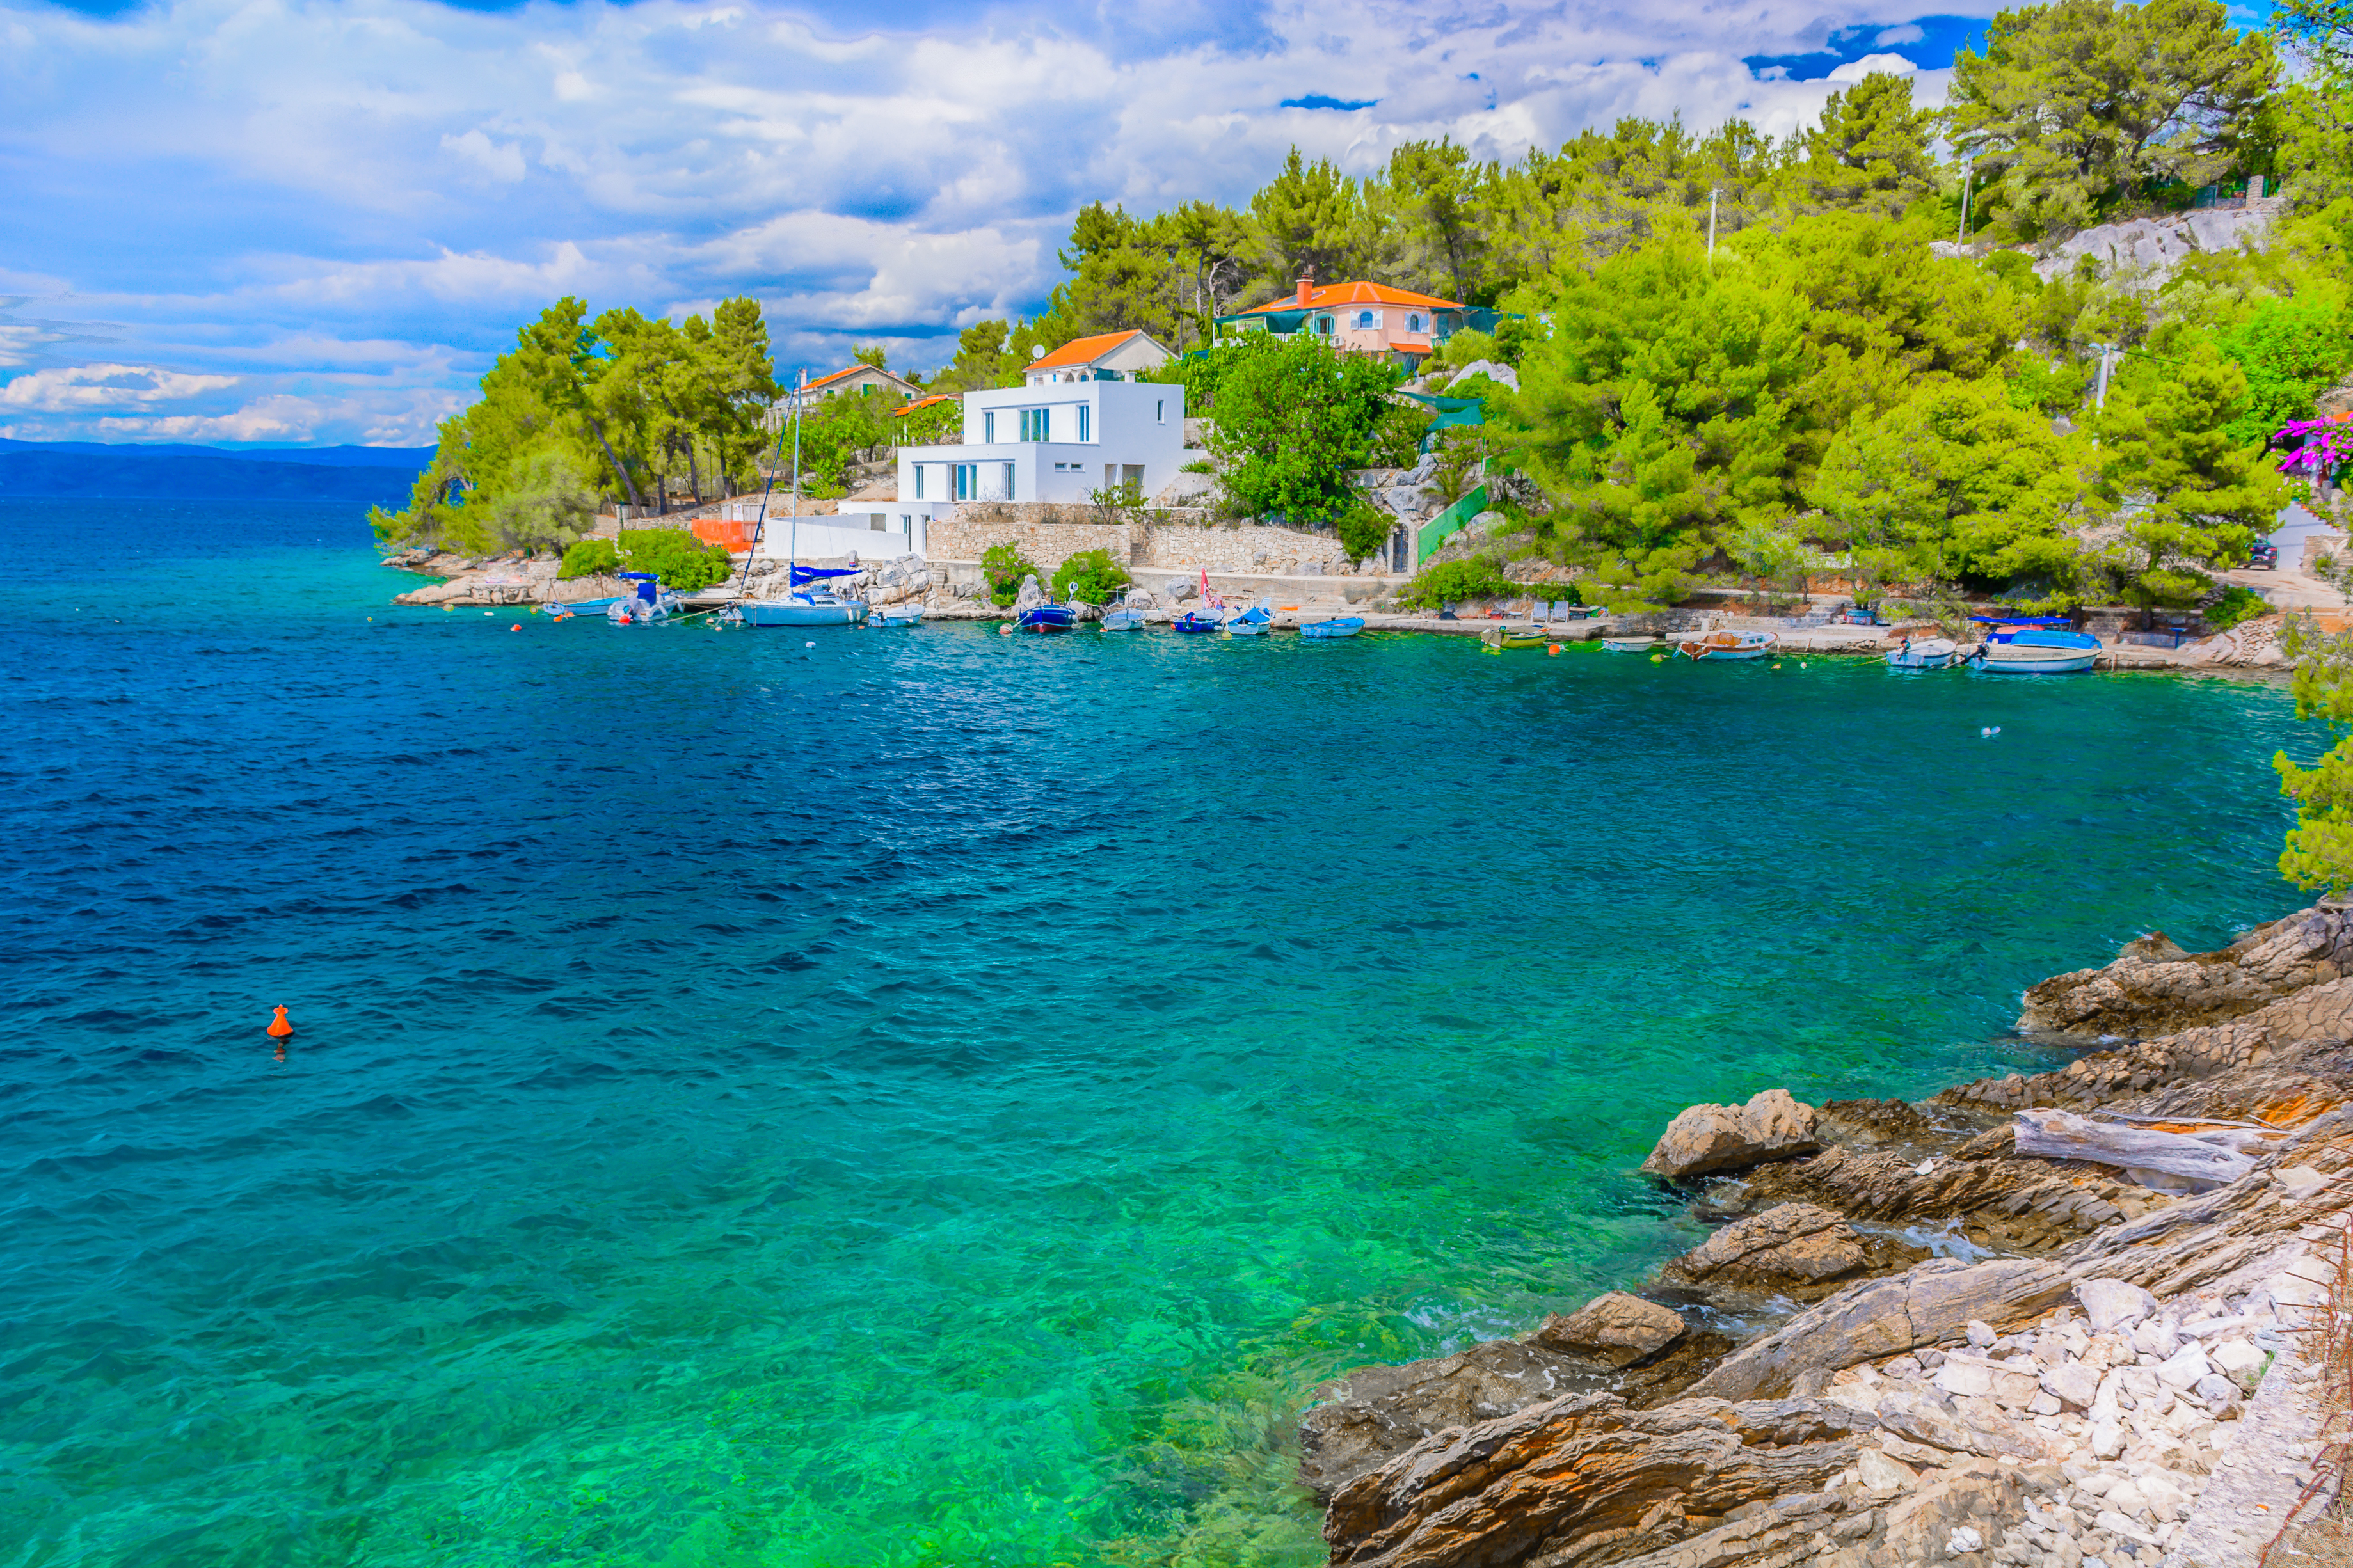 A hidden bay on the island of Solta, Croatia (Getty Images)